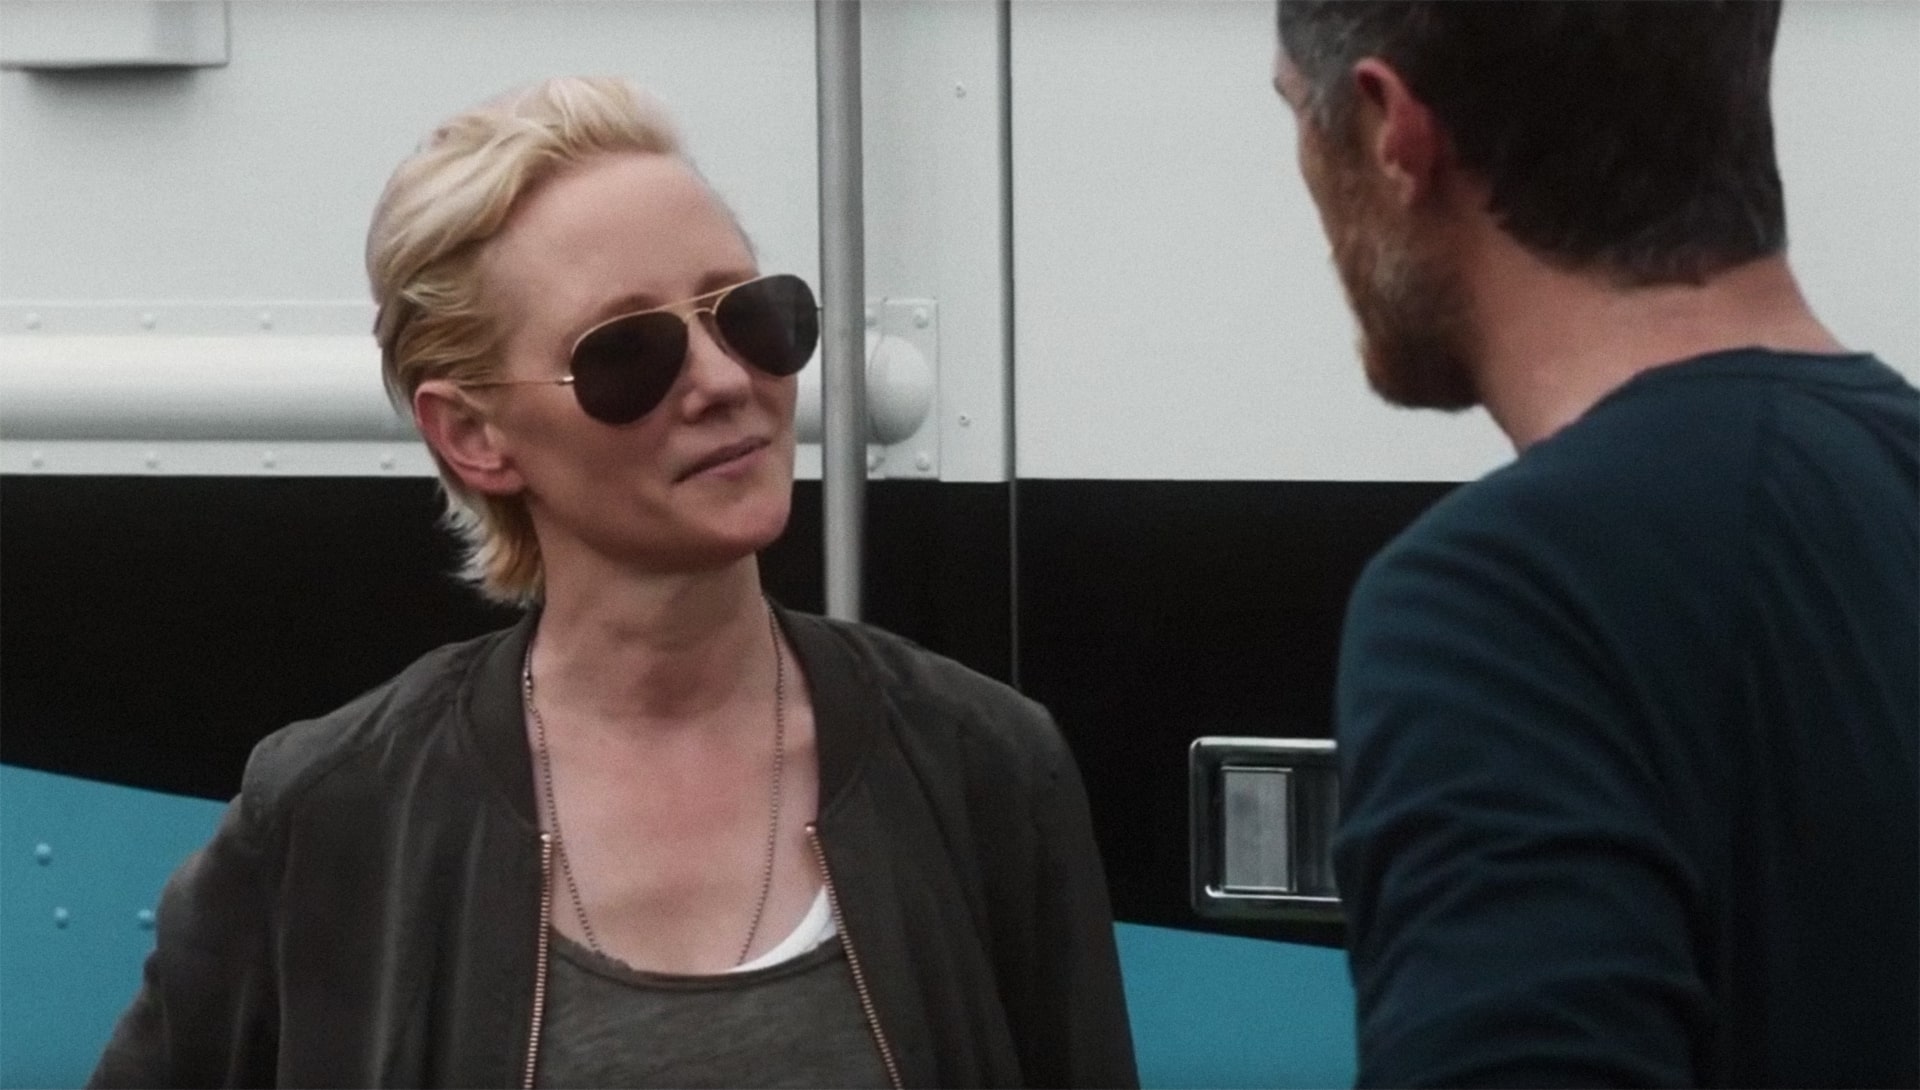 ARMED RESPONSE, from left: Anne Heche, Dave Annable, 2017